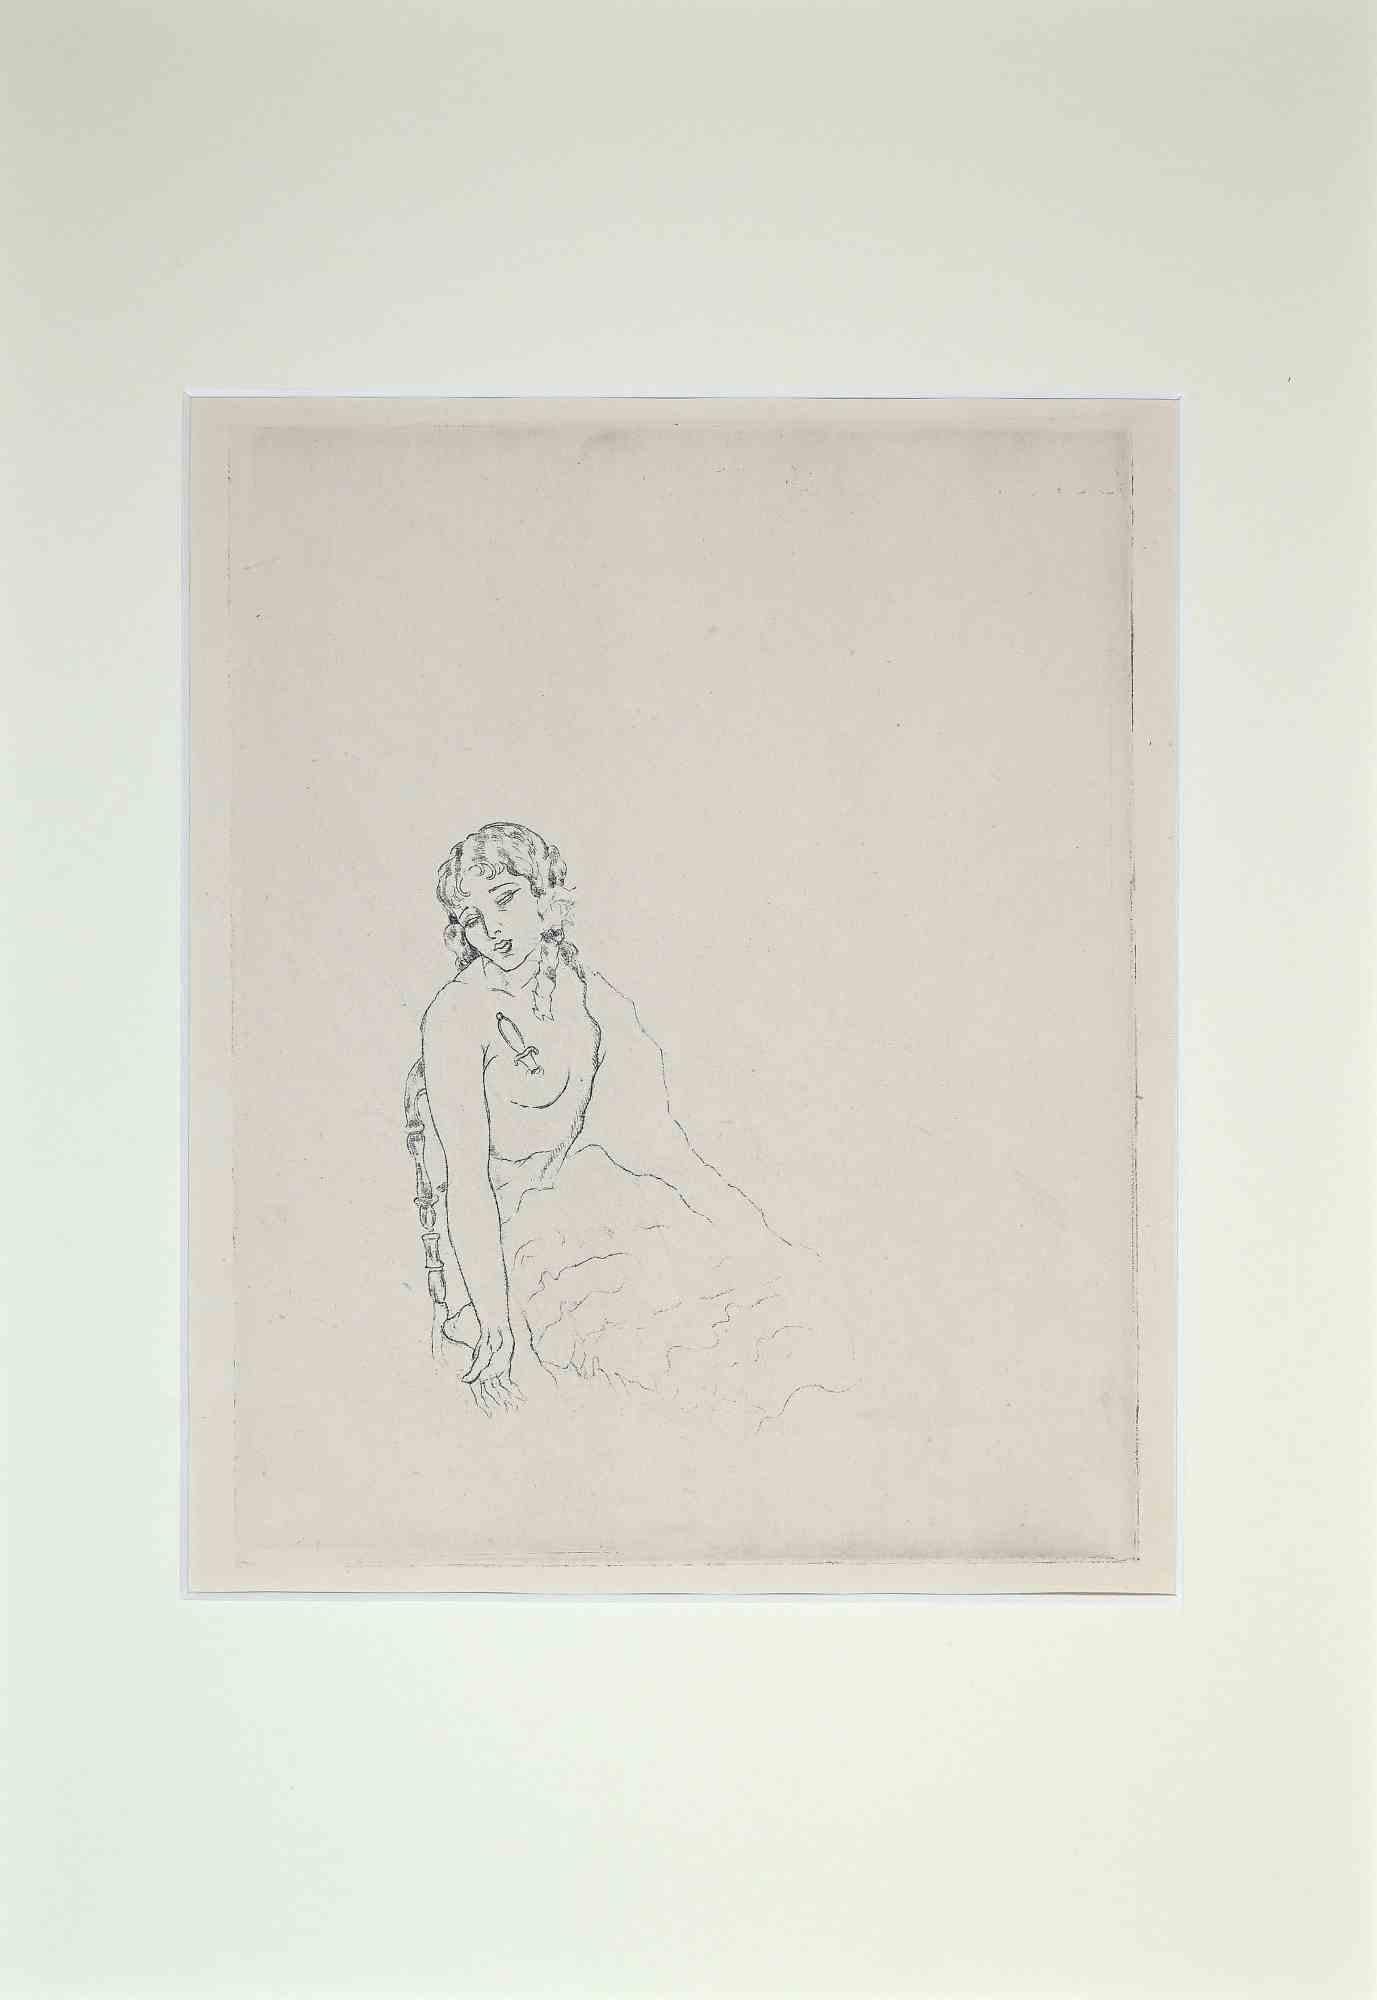 For Herodias of G. Florent is an original etching realized by Edouard Chimot in 1936.

The artwork is an etching, artist test before plate reduction.

Good condition included a white cardboard passpartout (49x34 cm).

No signature.